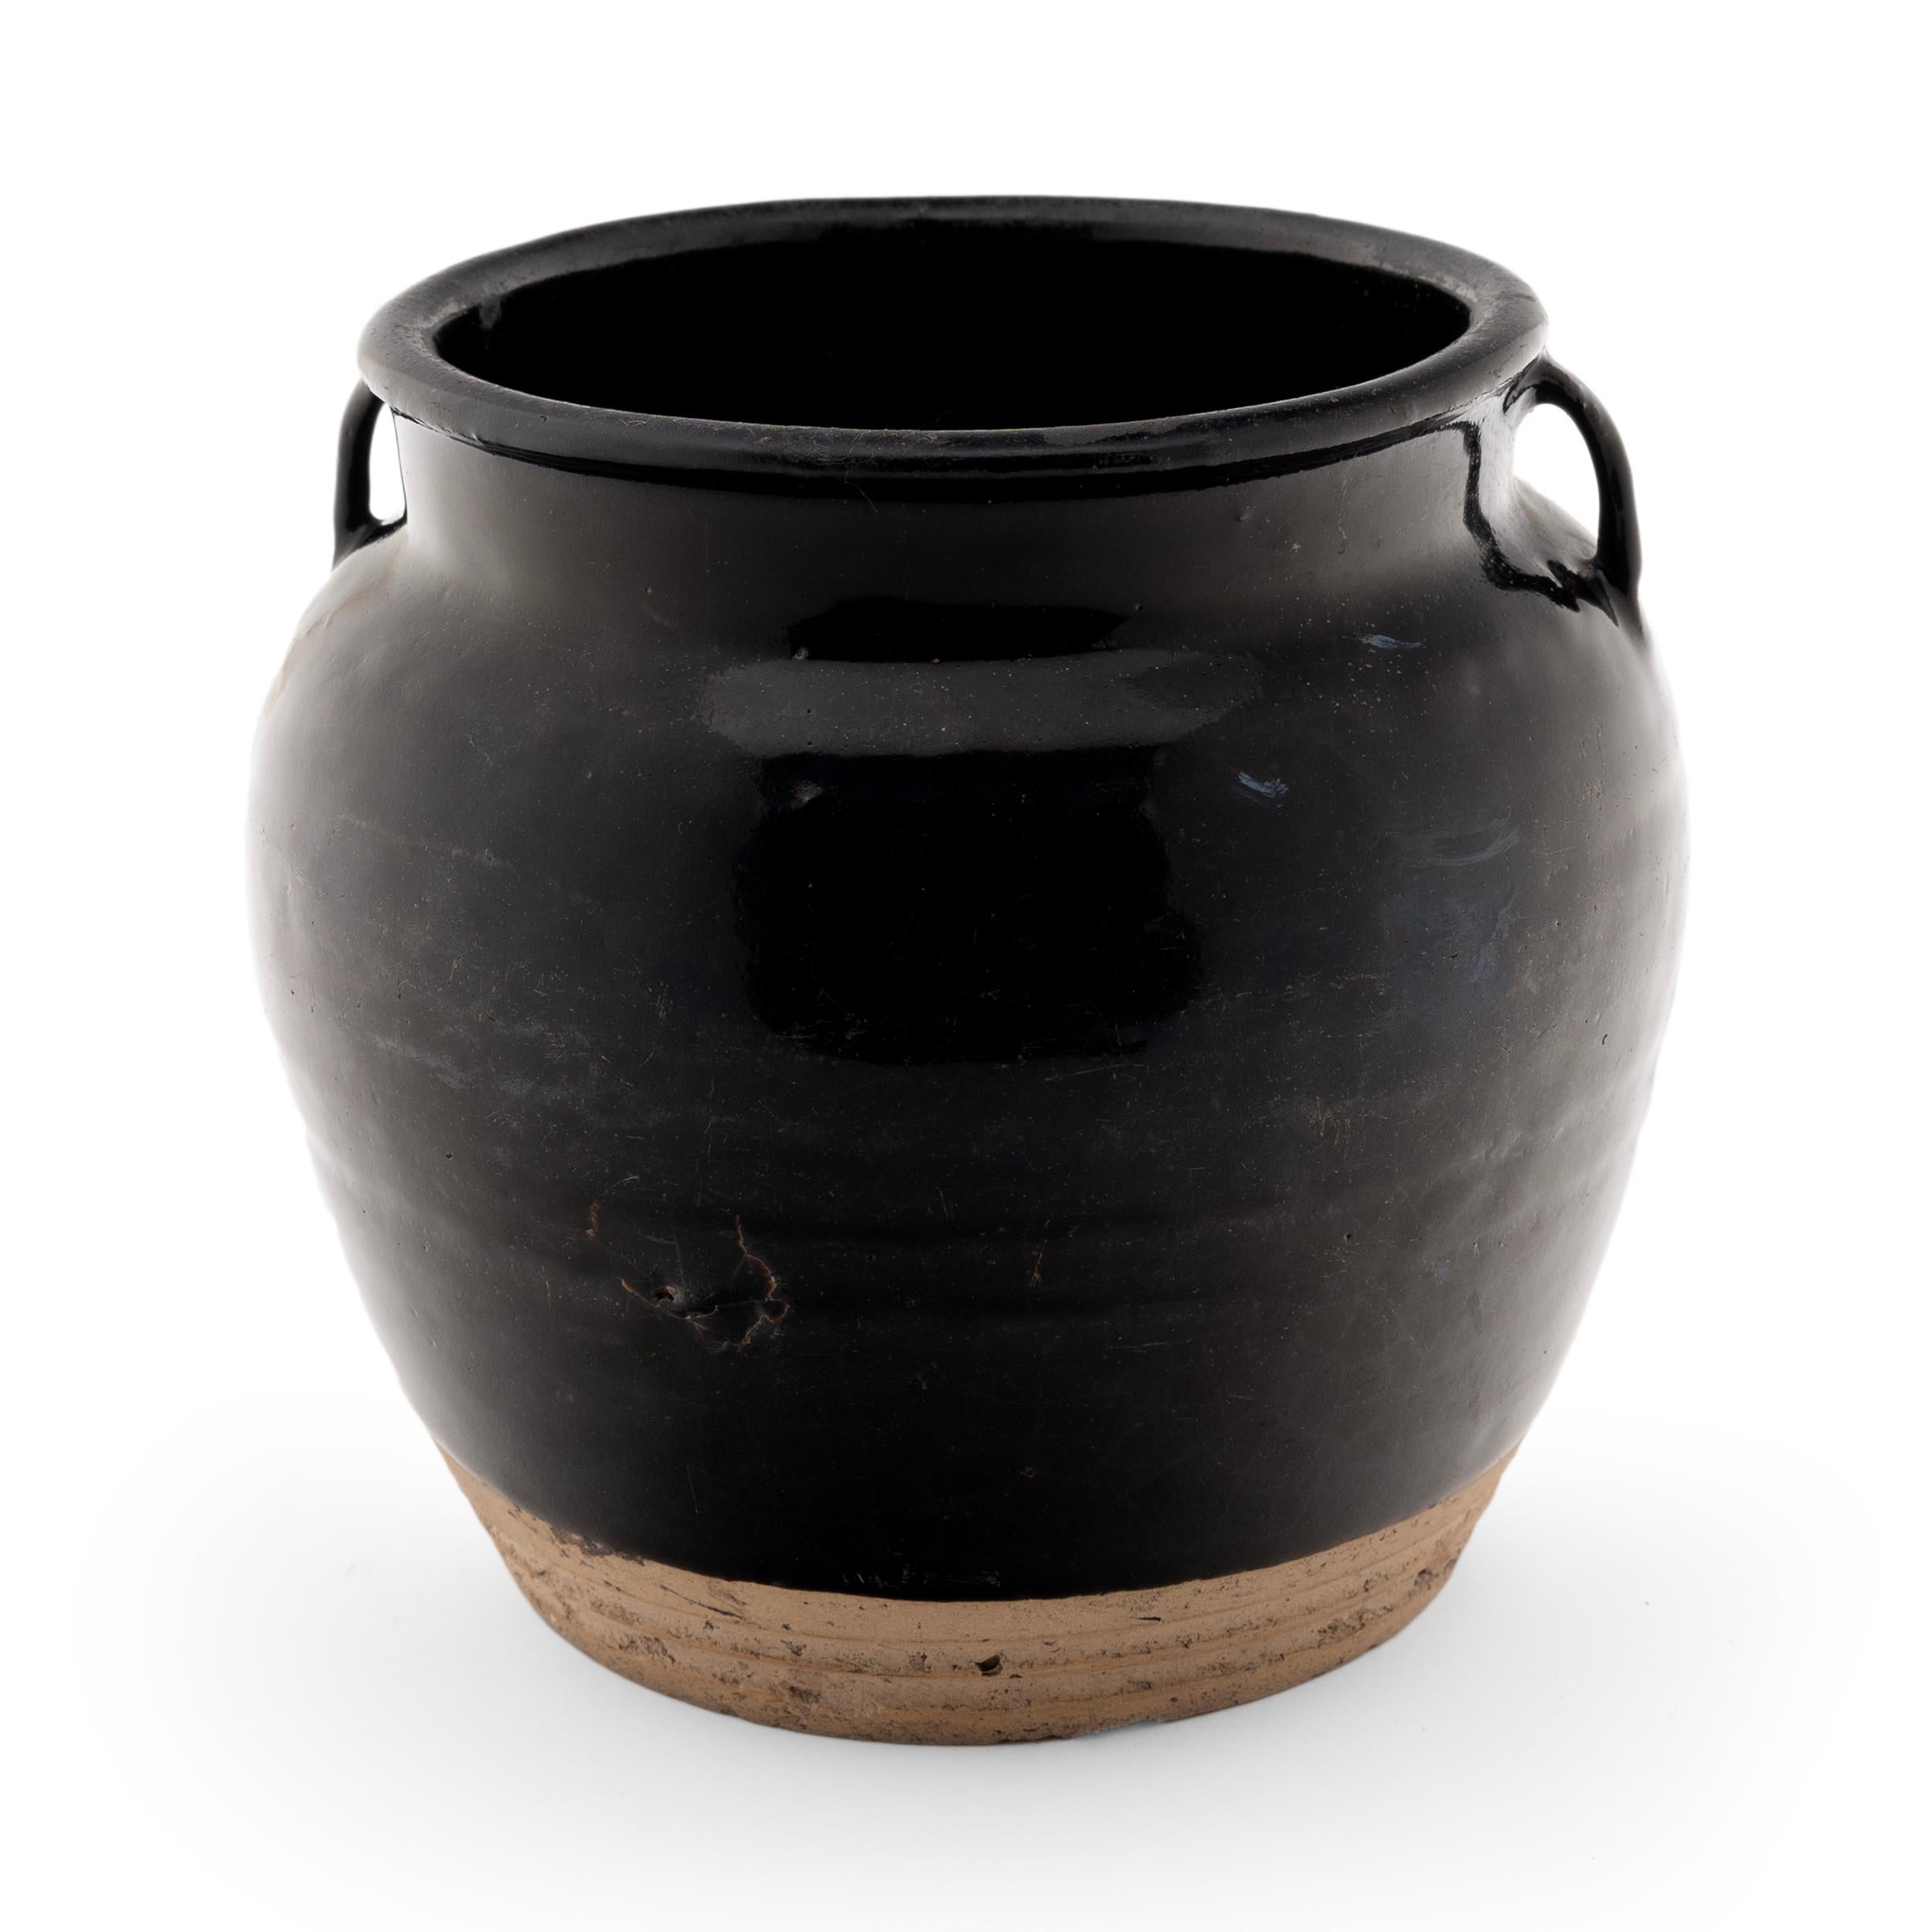 A lustrous, dark glaze clings to the squat form of this petite kitchen jar. The glazed vessel dates to the early 20th Century and was used for storing food and condiments in a Provincial Qing-dynasty kitchen, as evidenced by its interior glaze. The